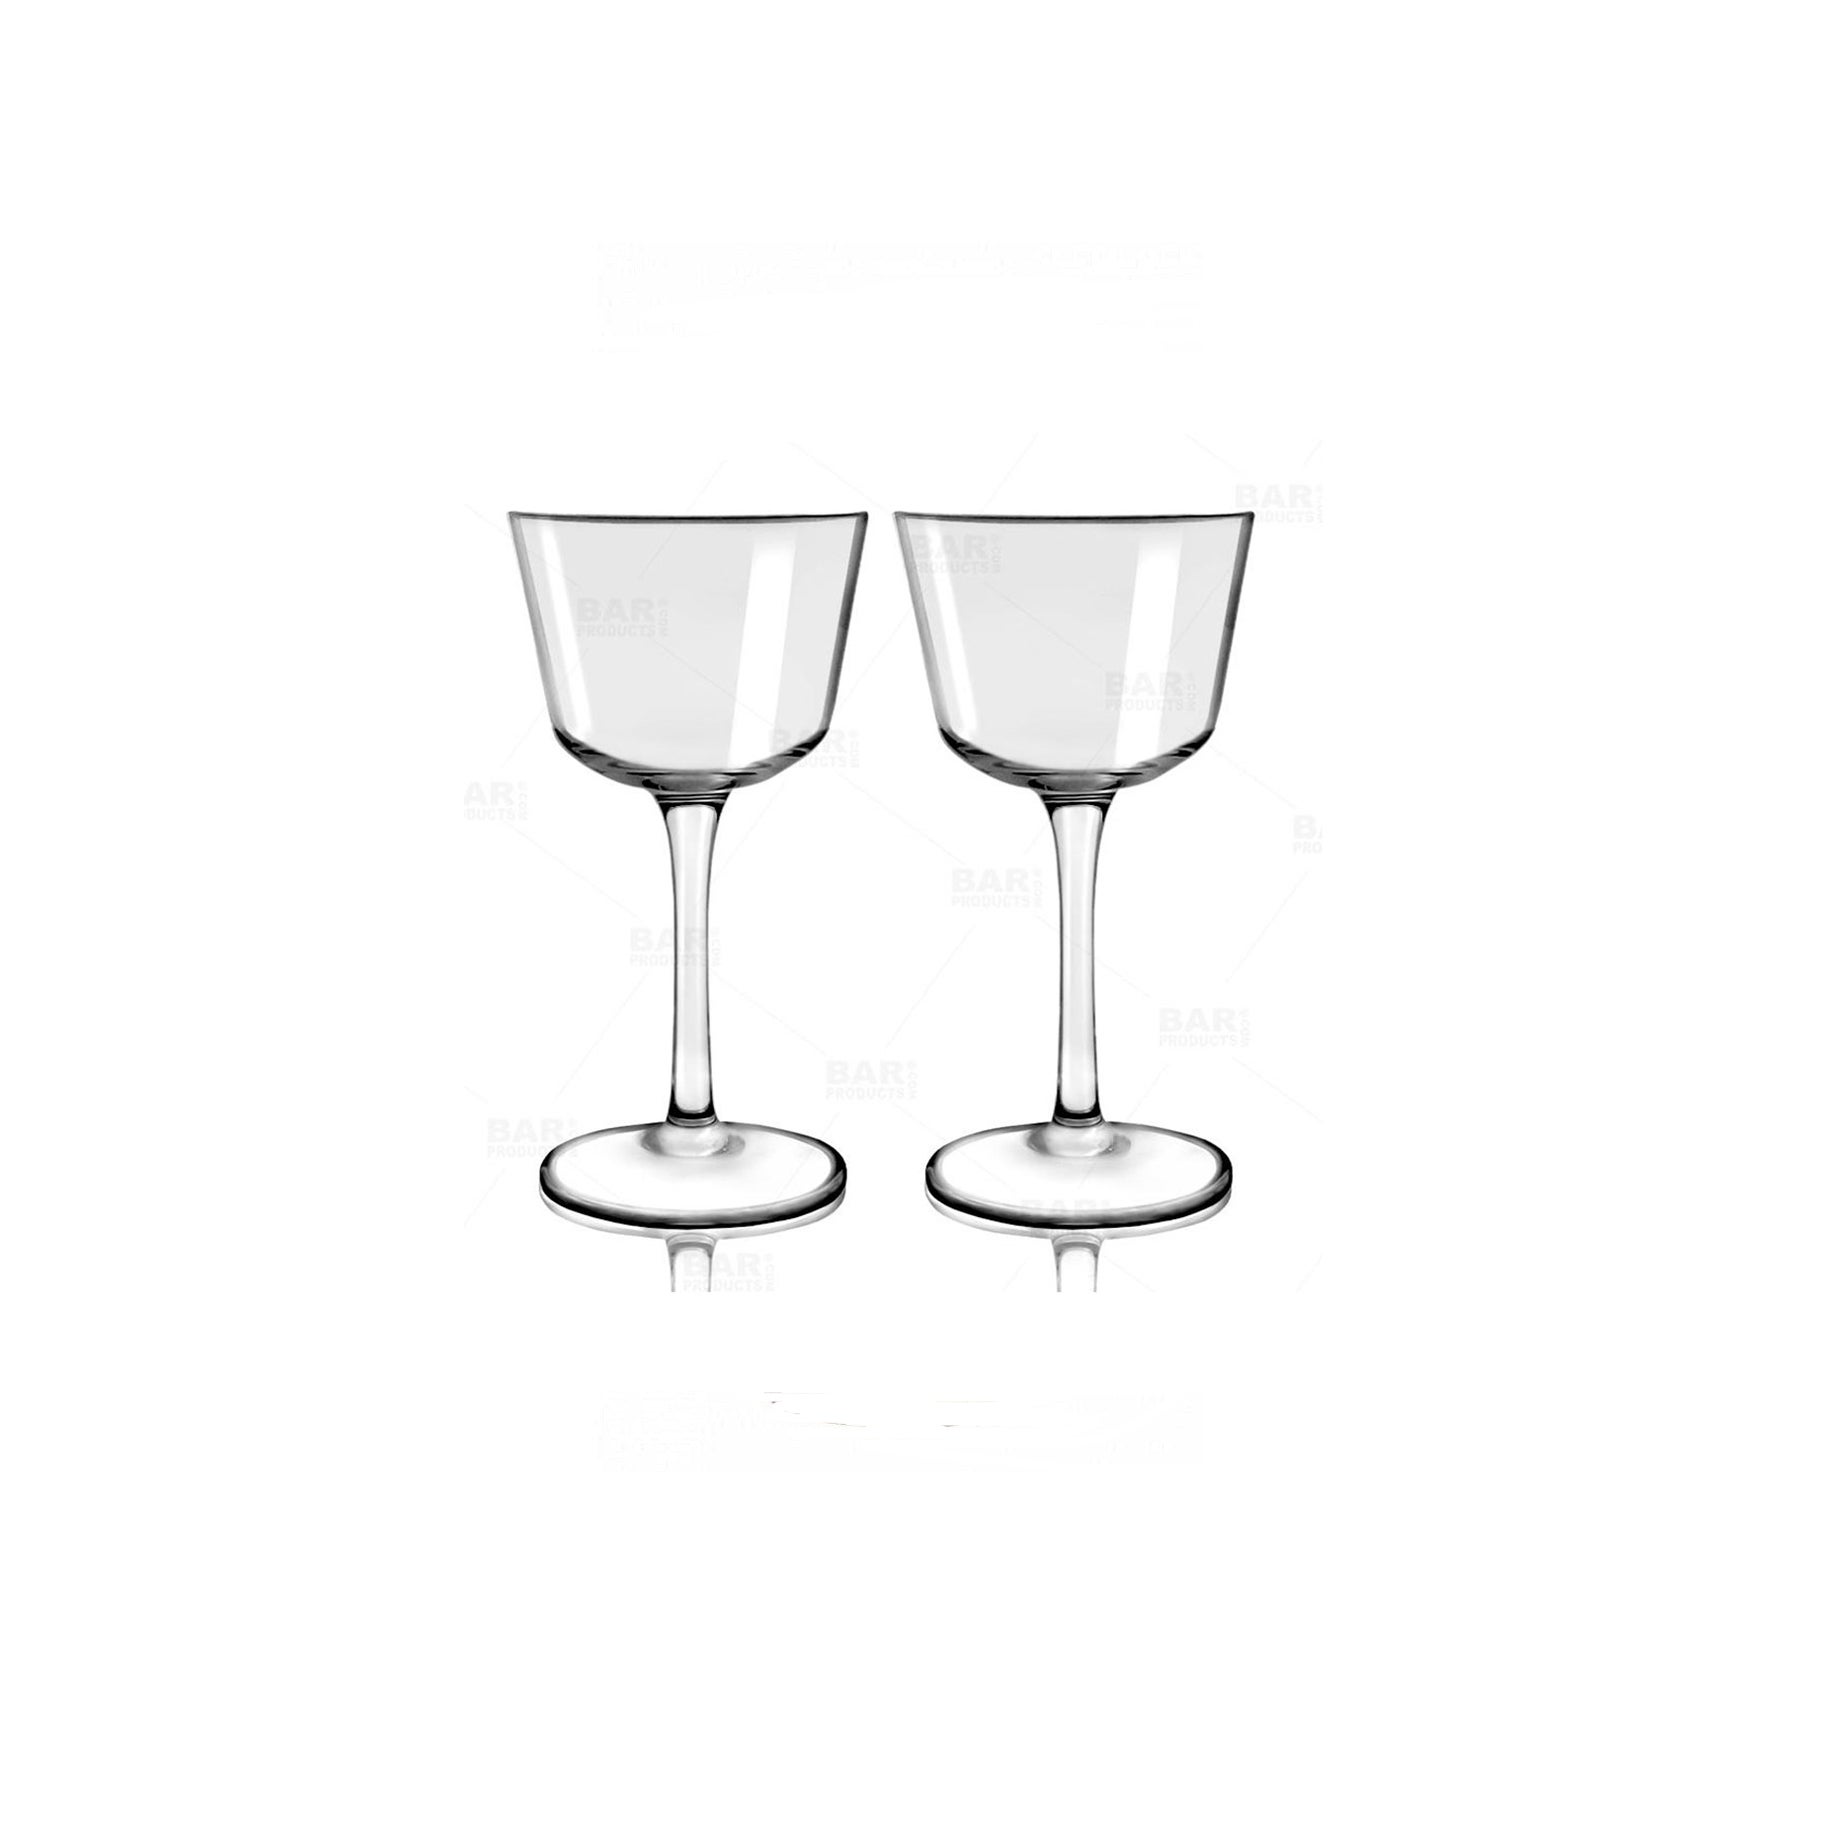 https://www.saveur.com/uploads/2021/09/17/The-Best-Martini-Glass-Option-Bar-Products-Nick-and-Nora.jpg?auto=webp